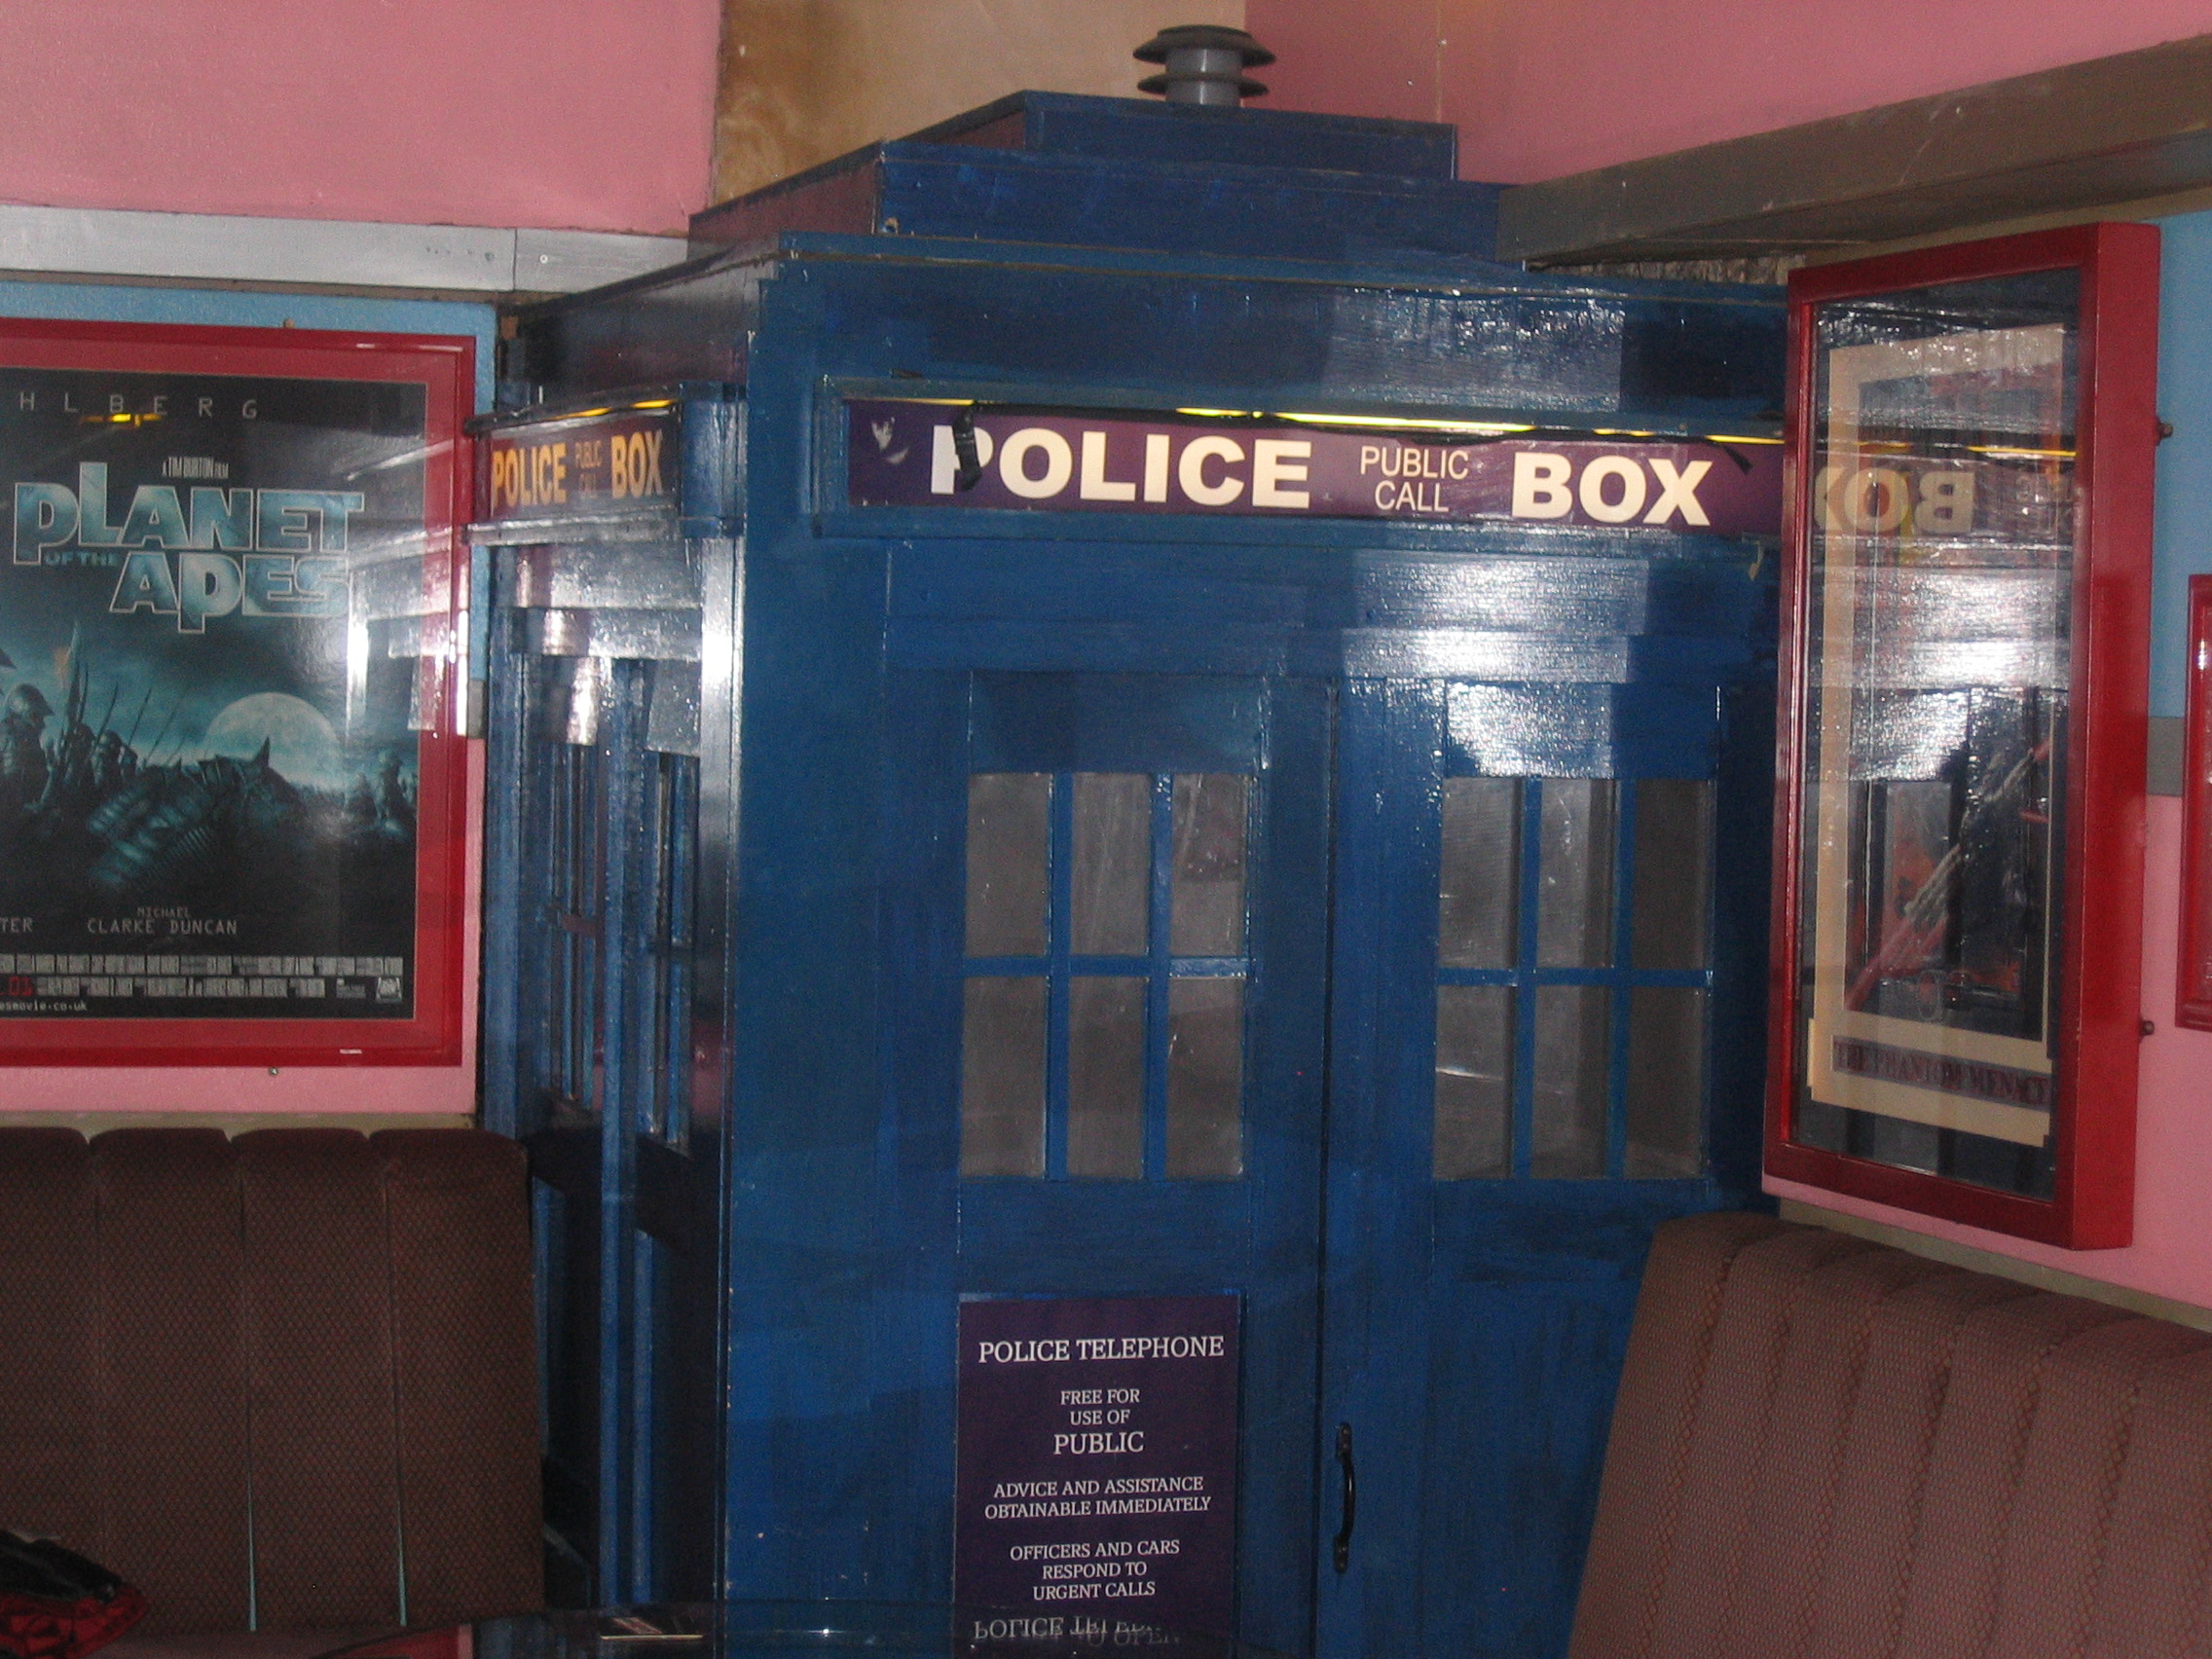 Photo taken by me – The TARDIS in Manchester 